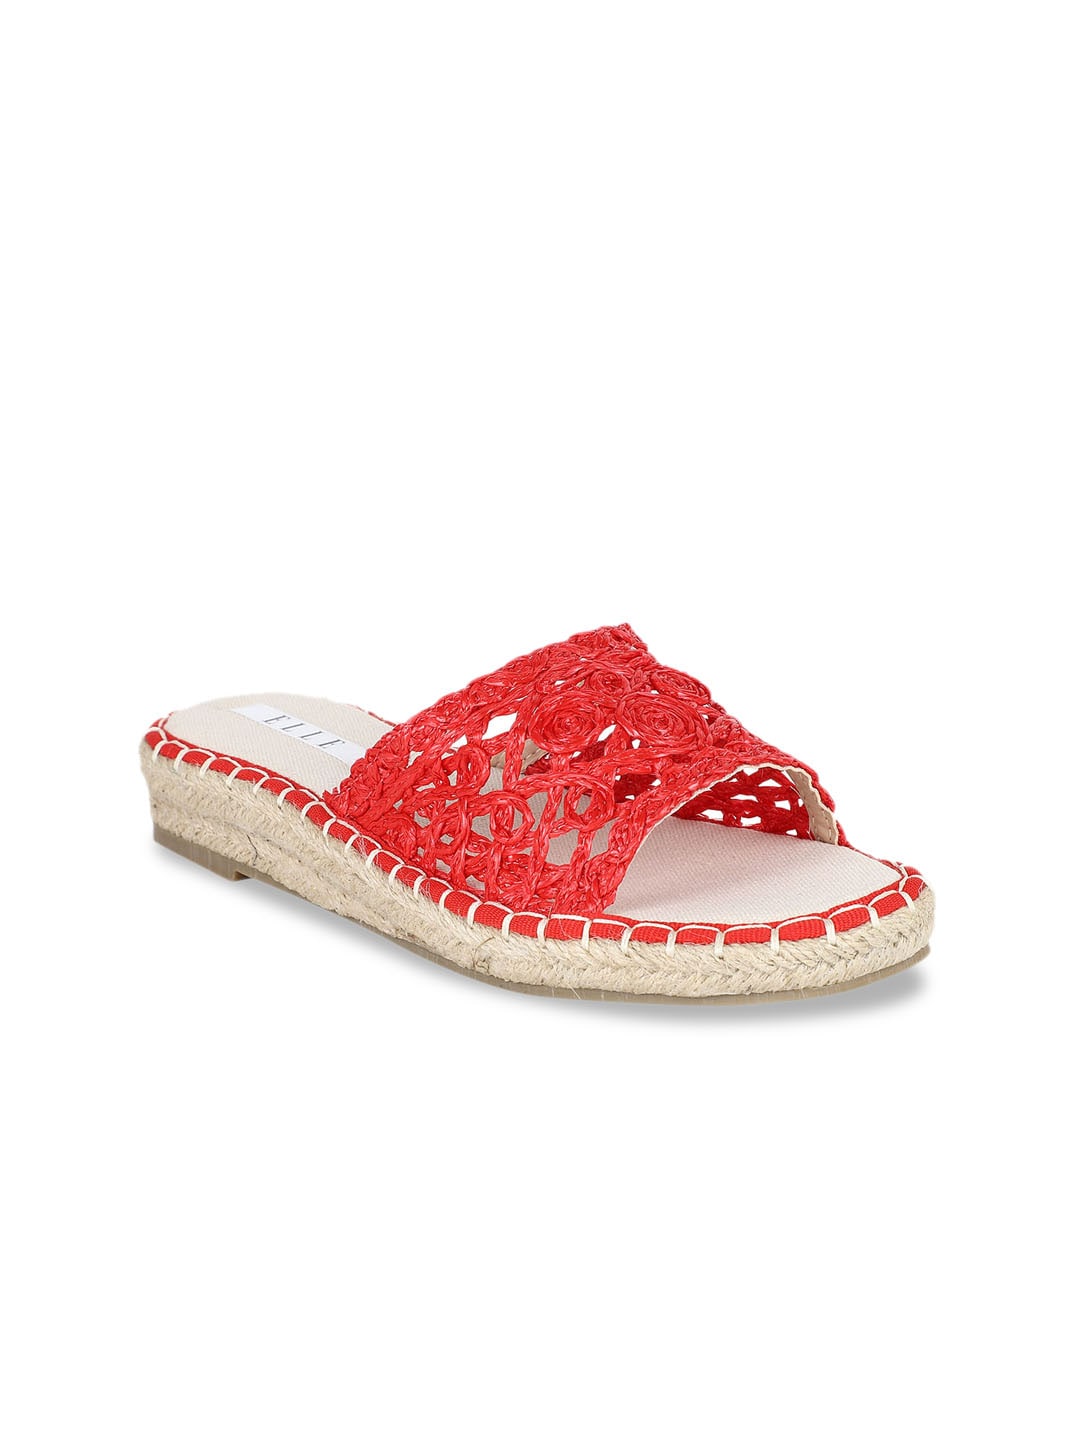 ELLE Women Pink Woven Design Open Toe Flats Price in India